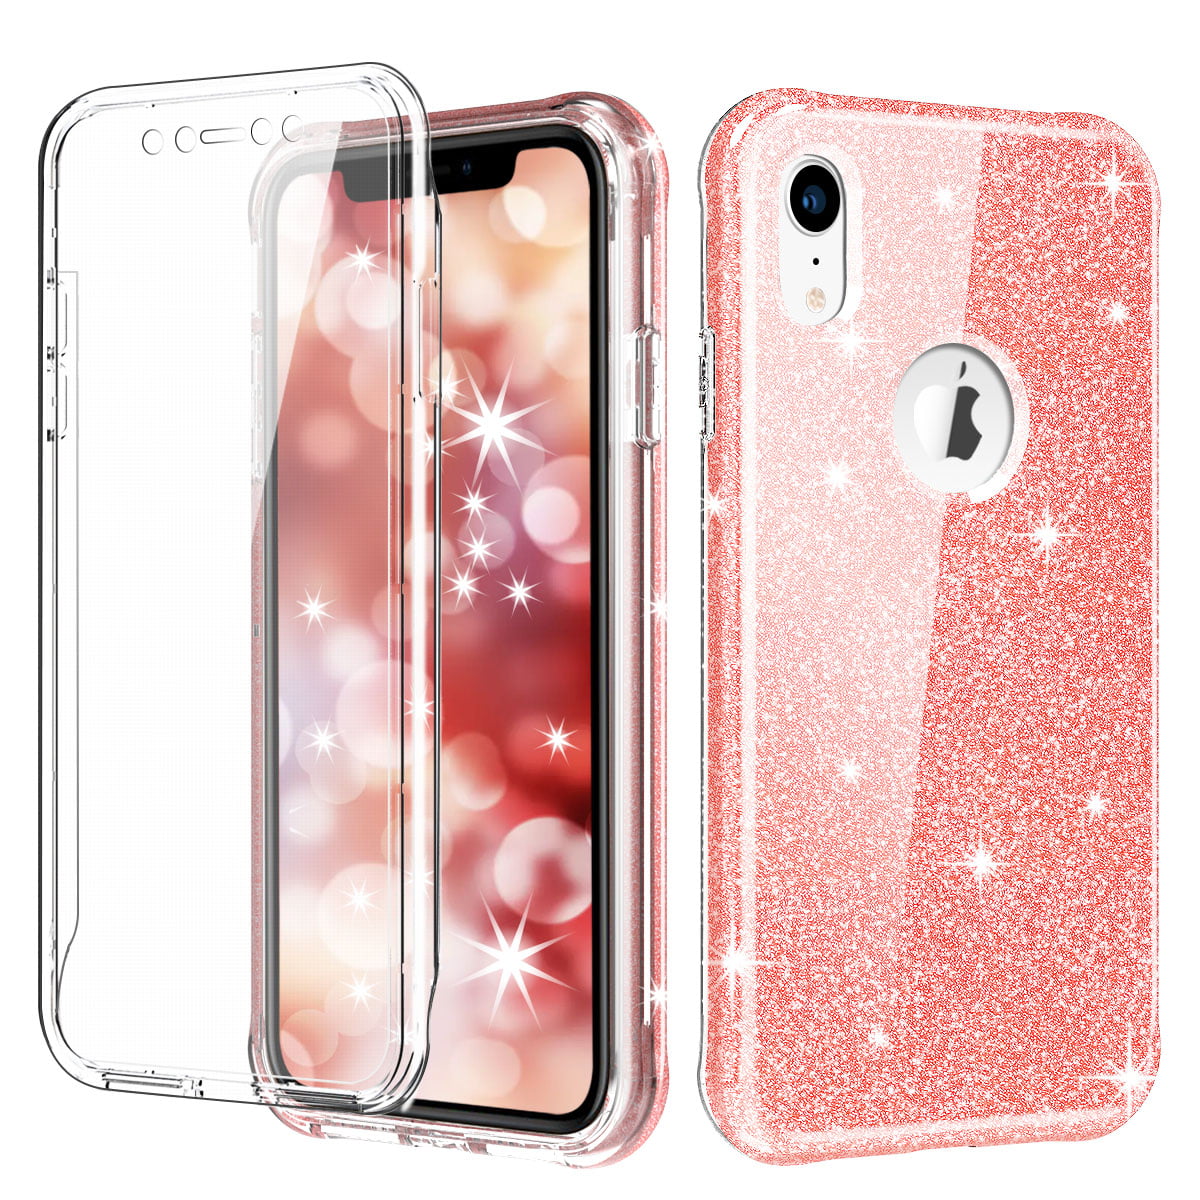 Compatible iPhone XR Case for Girls Flower A Floral Flower Cute Case Ultra-Thin Slim Soft TPU Silicone Cover Phone case for iPhone XR 6.1 Inch 